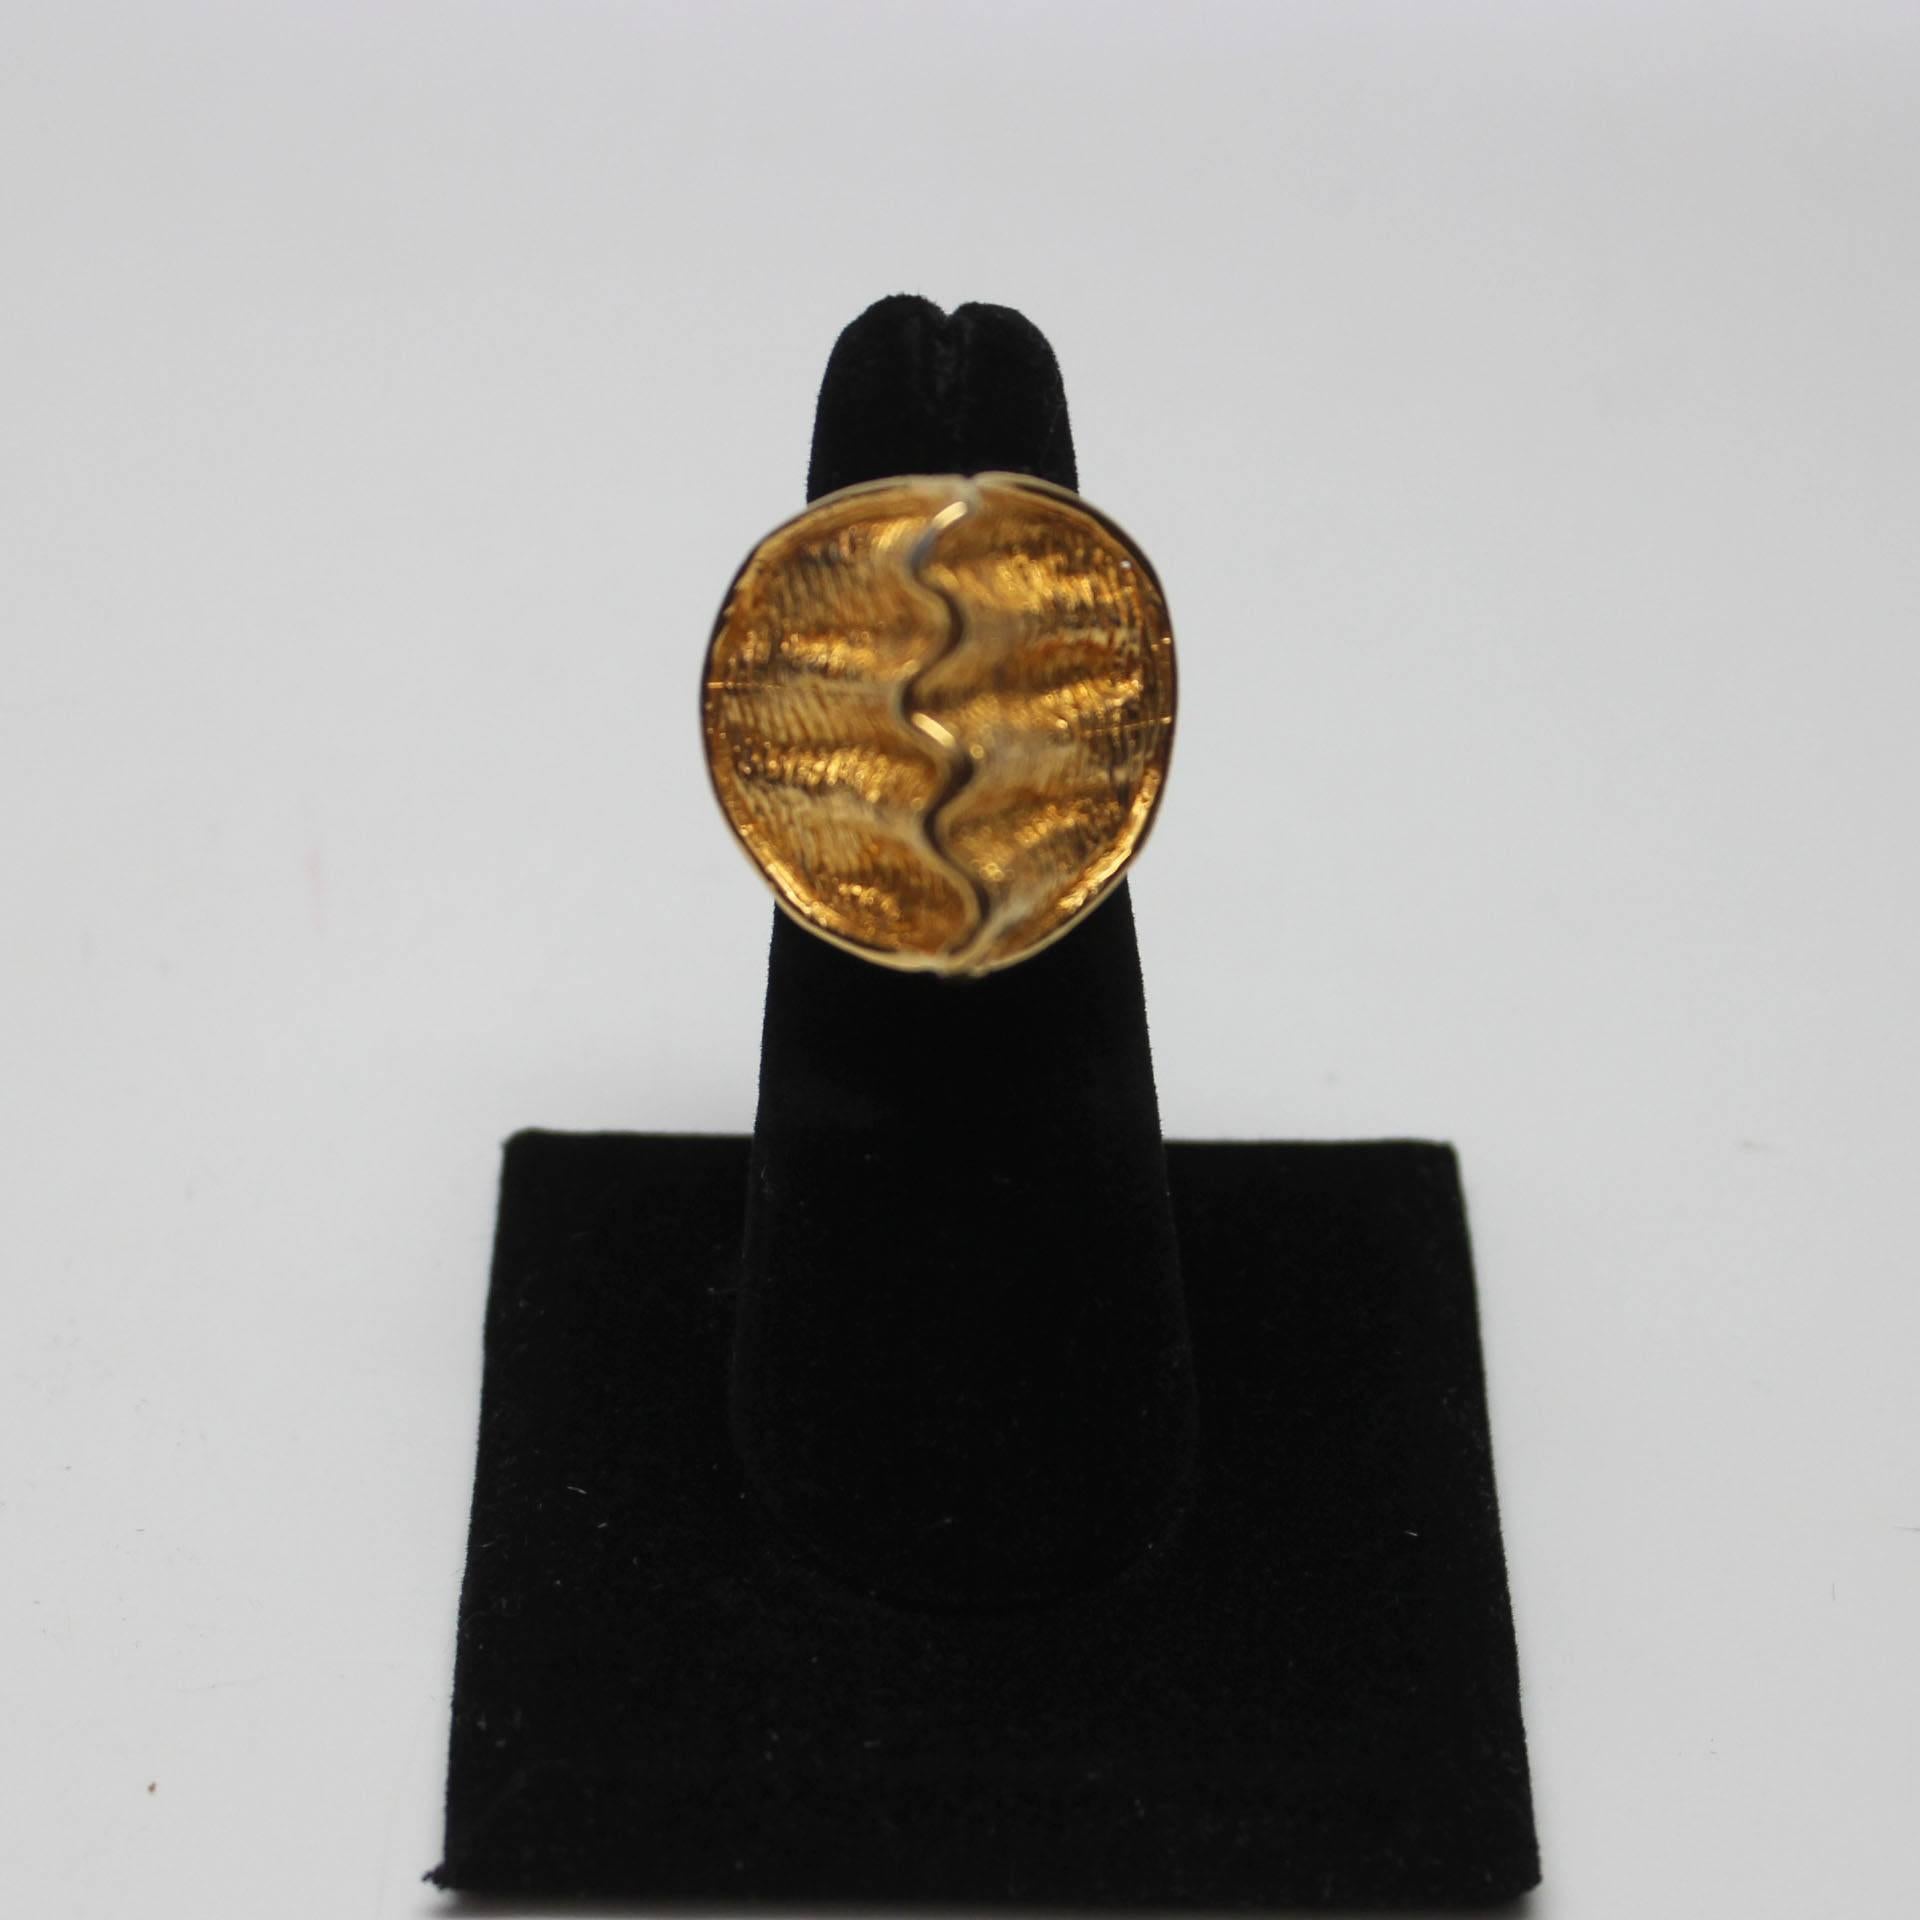 This Kenneth J Lane is unusual in that it is more abstract and sculptural than most of his jewelry. It's a striking, bold piece as it extends high over the finger in an almost architetual style. Size 6.